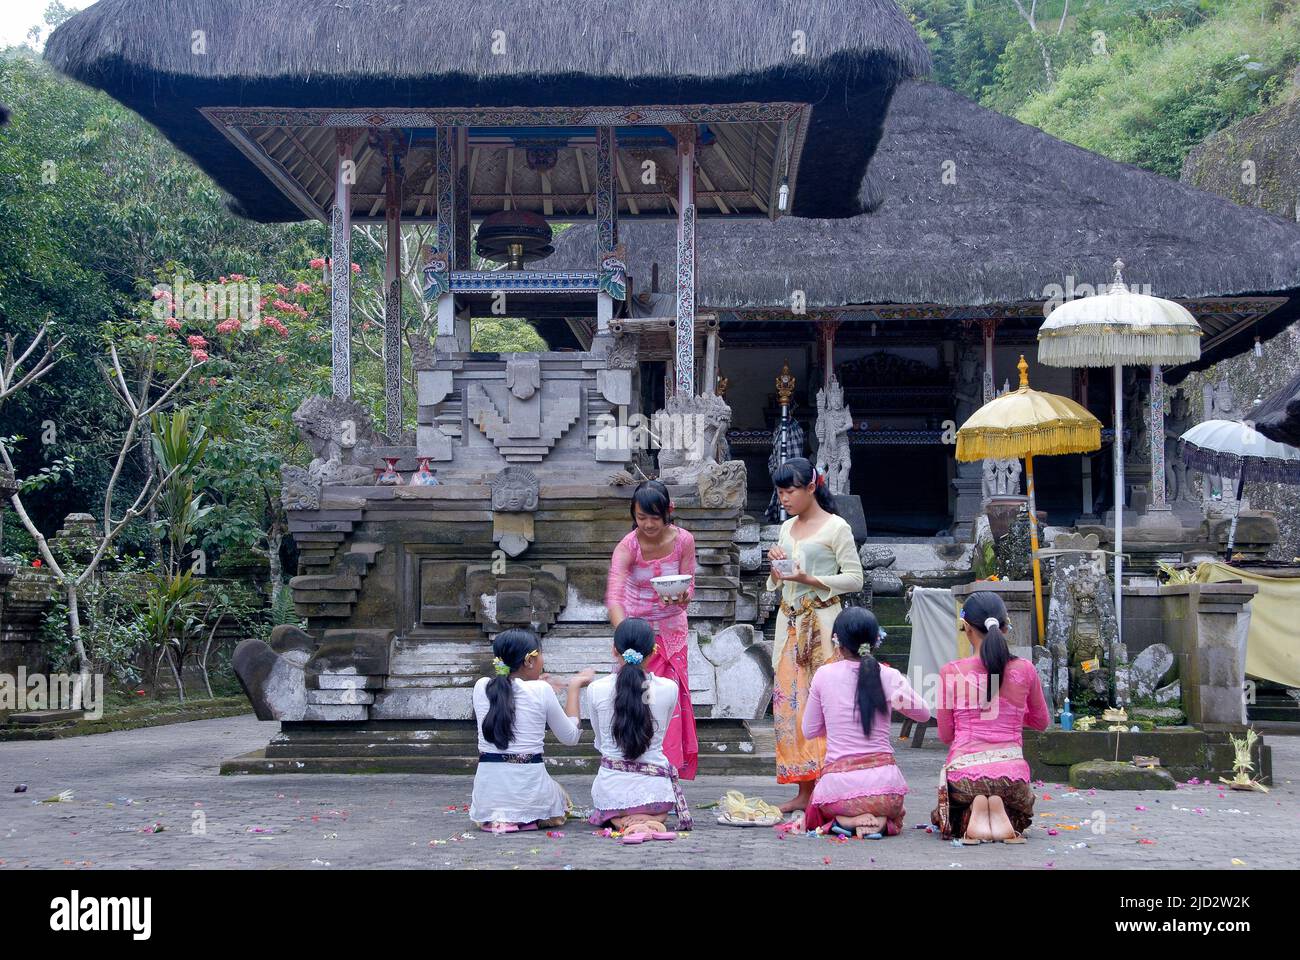 Devotees at the temple at Tirta Empul, holy springs discovered in 962. Stock Photo